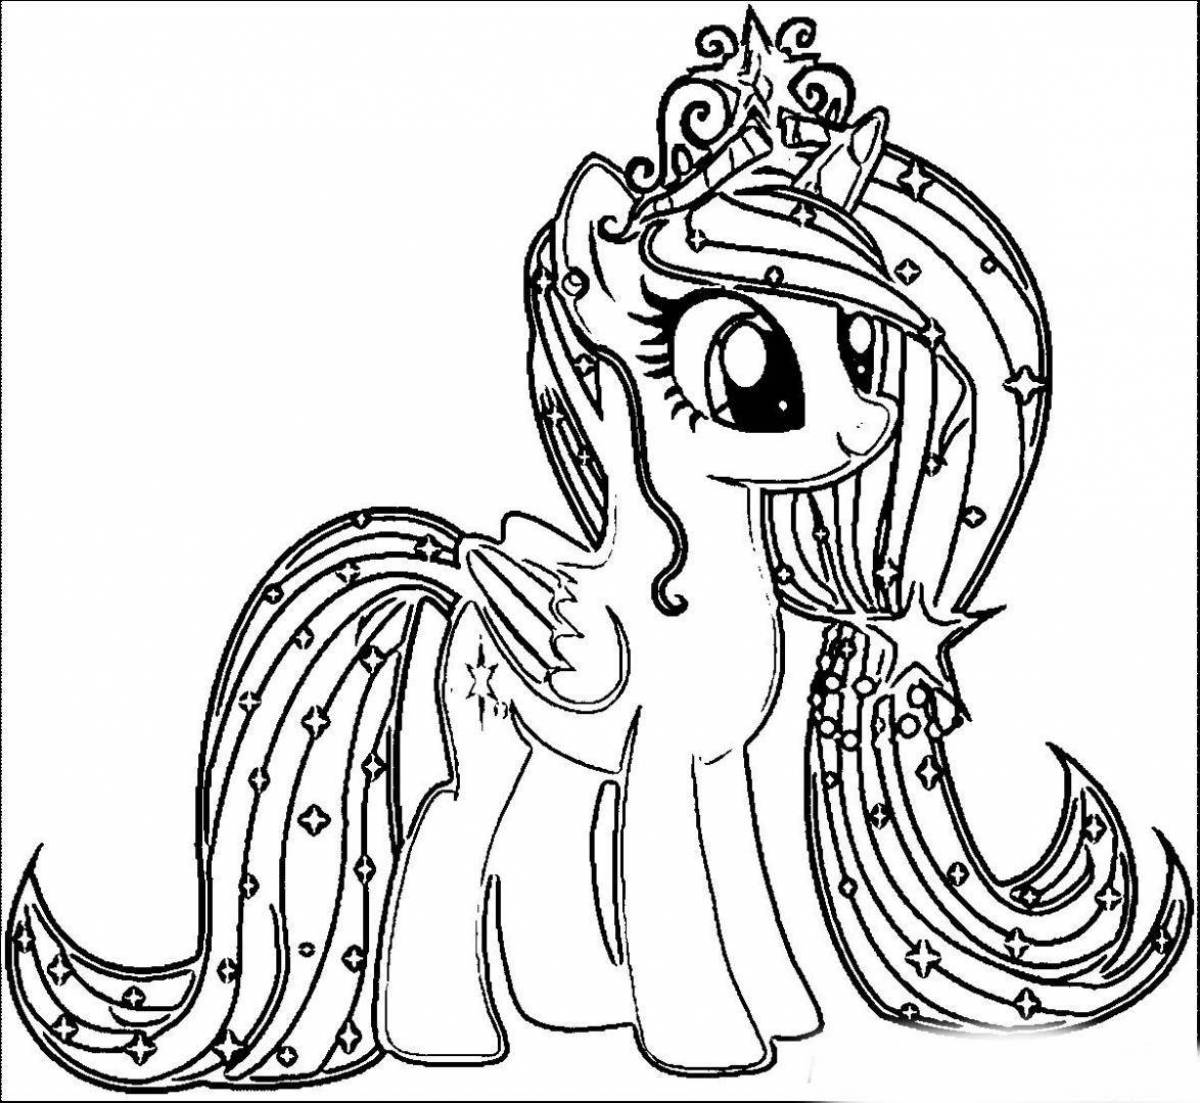 Coloring page amazing pony drawing